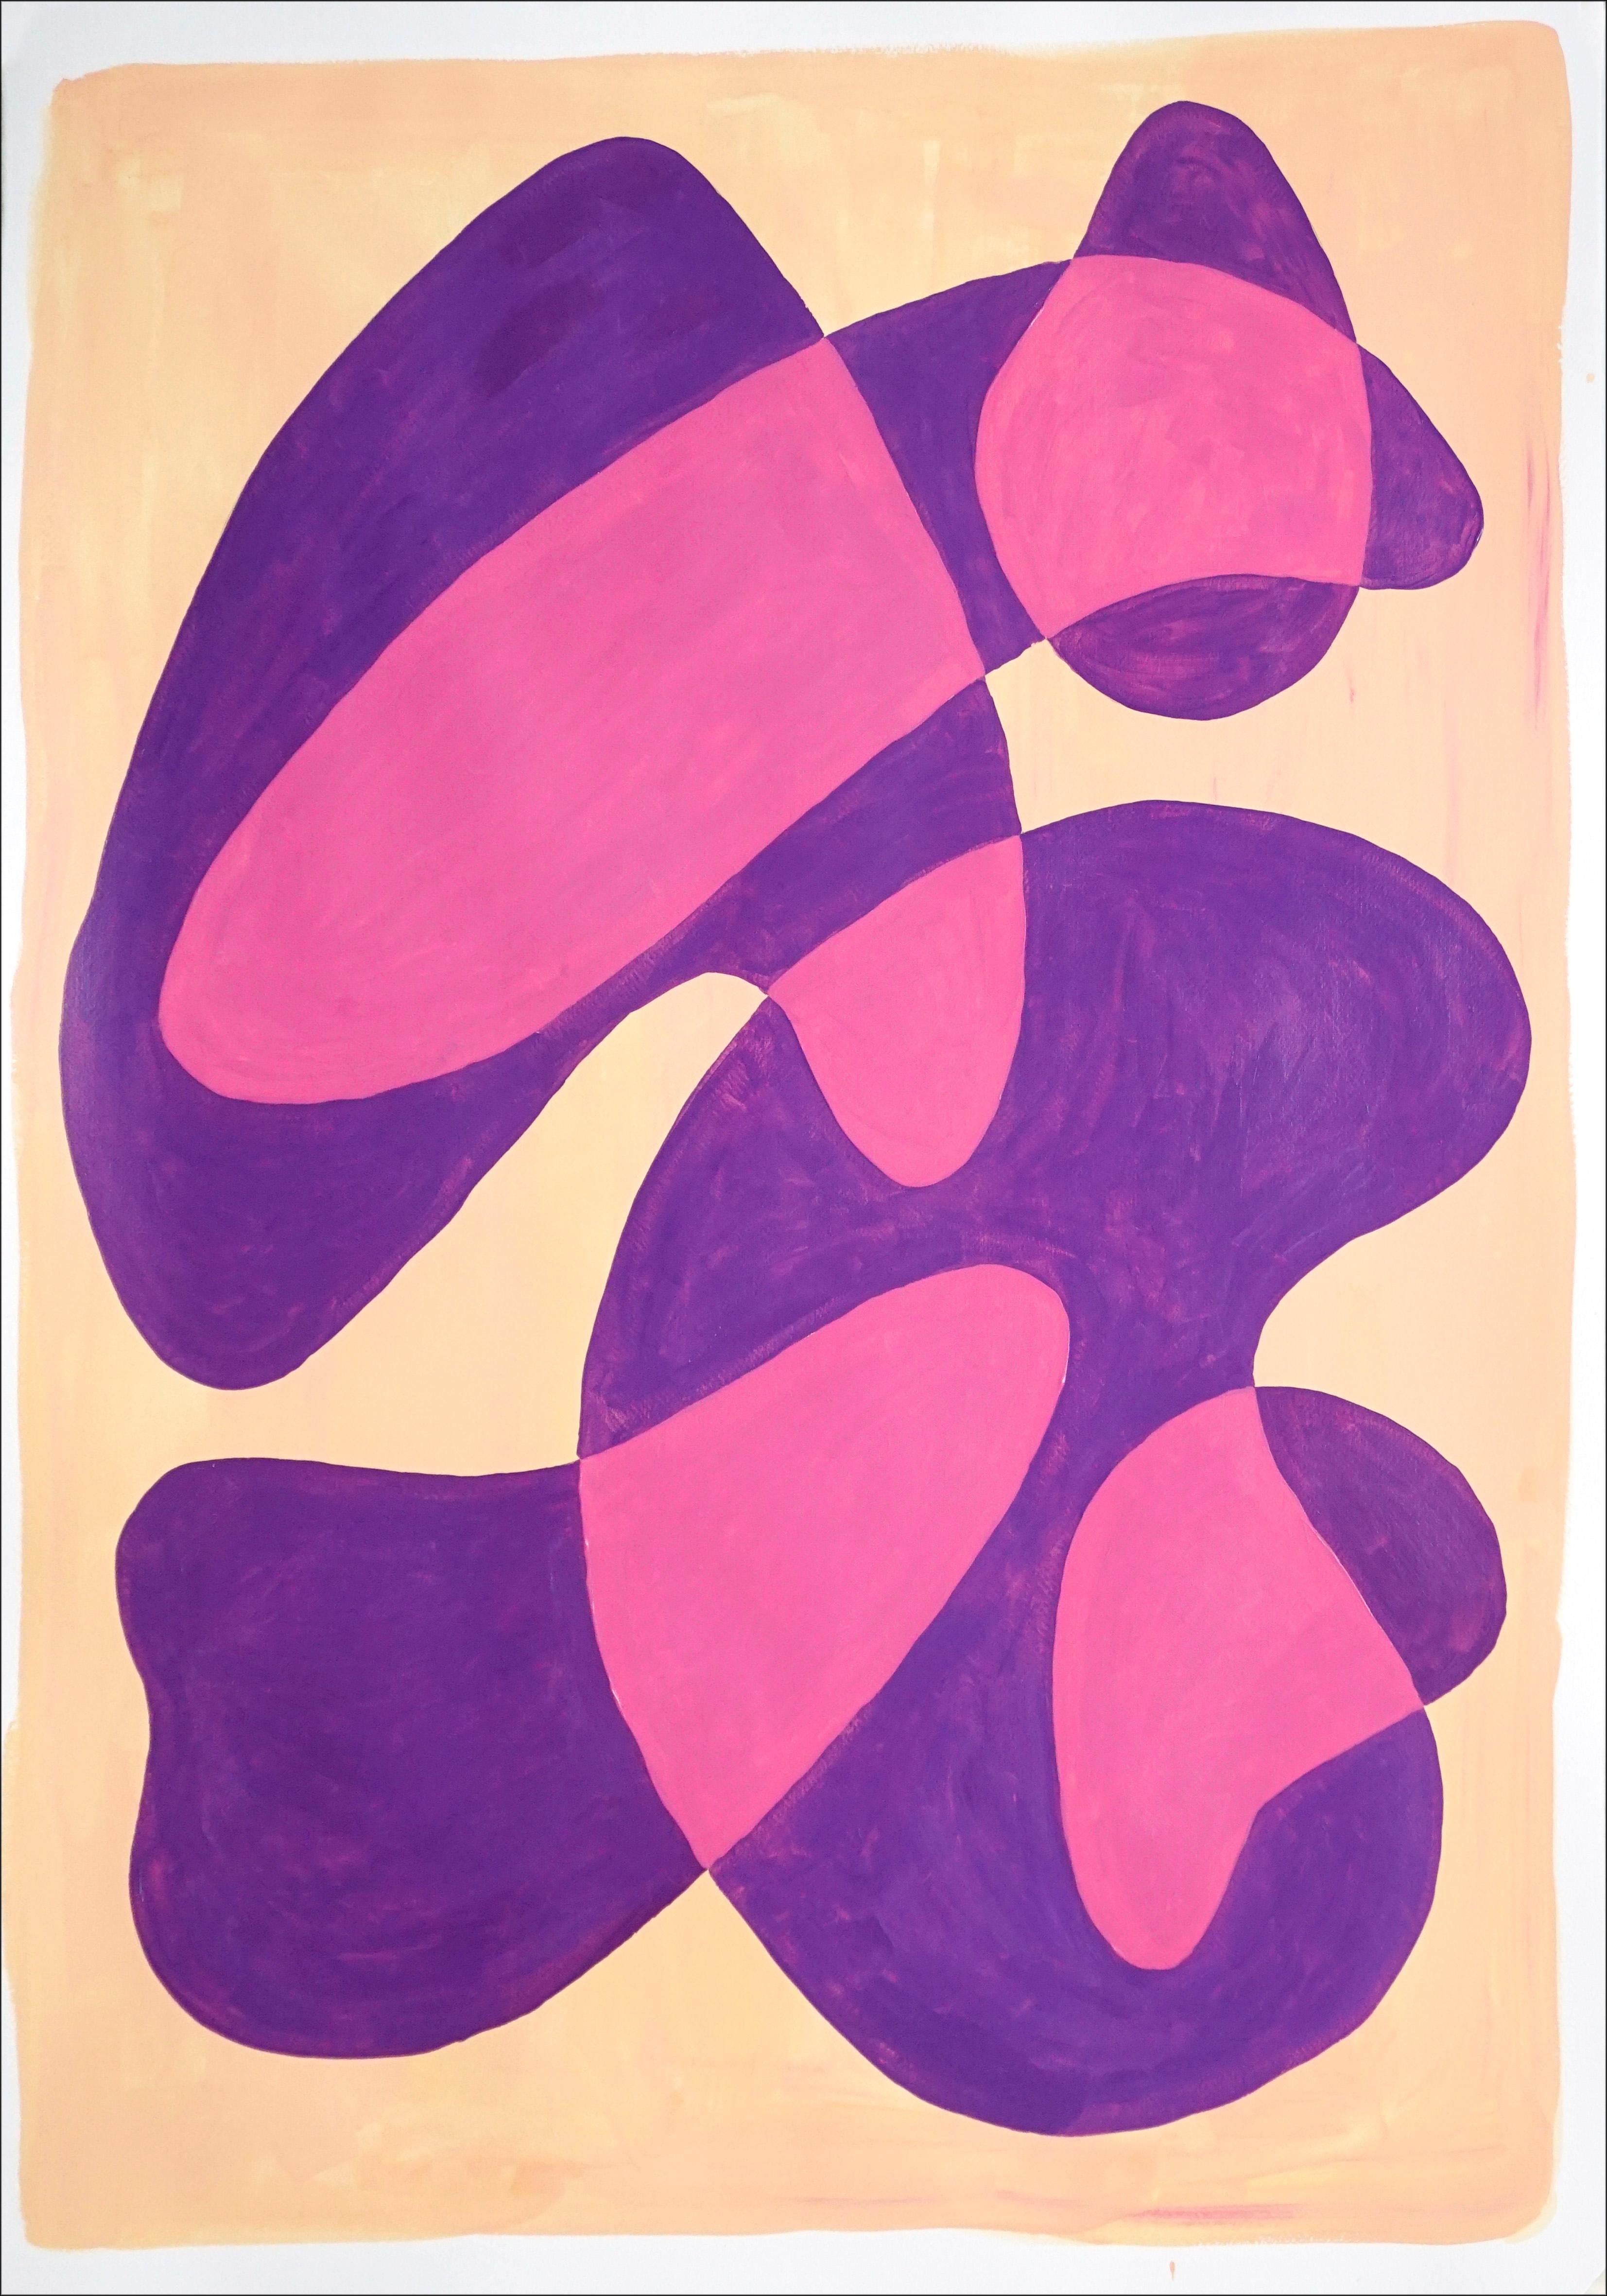 Translucent Purple Bubbles, Mid-Century Shapes in Warm Tones, Overlapping Layers